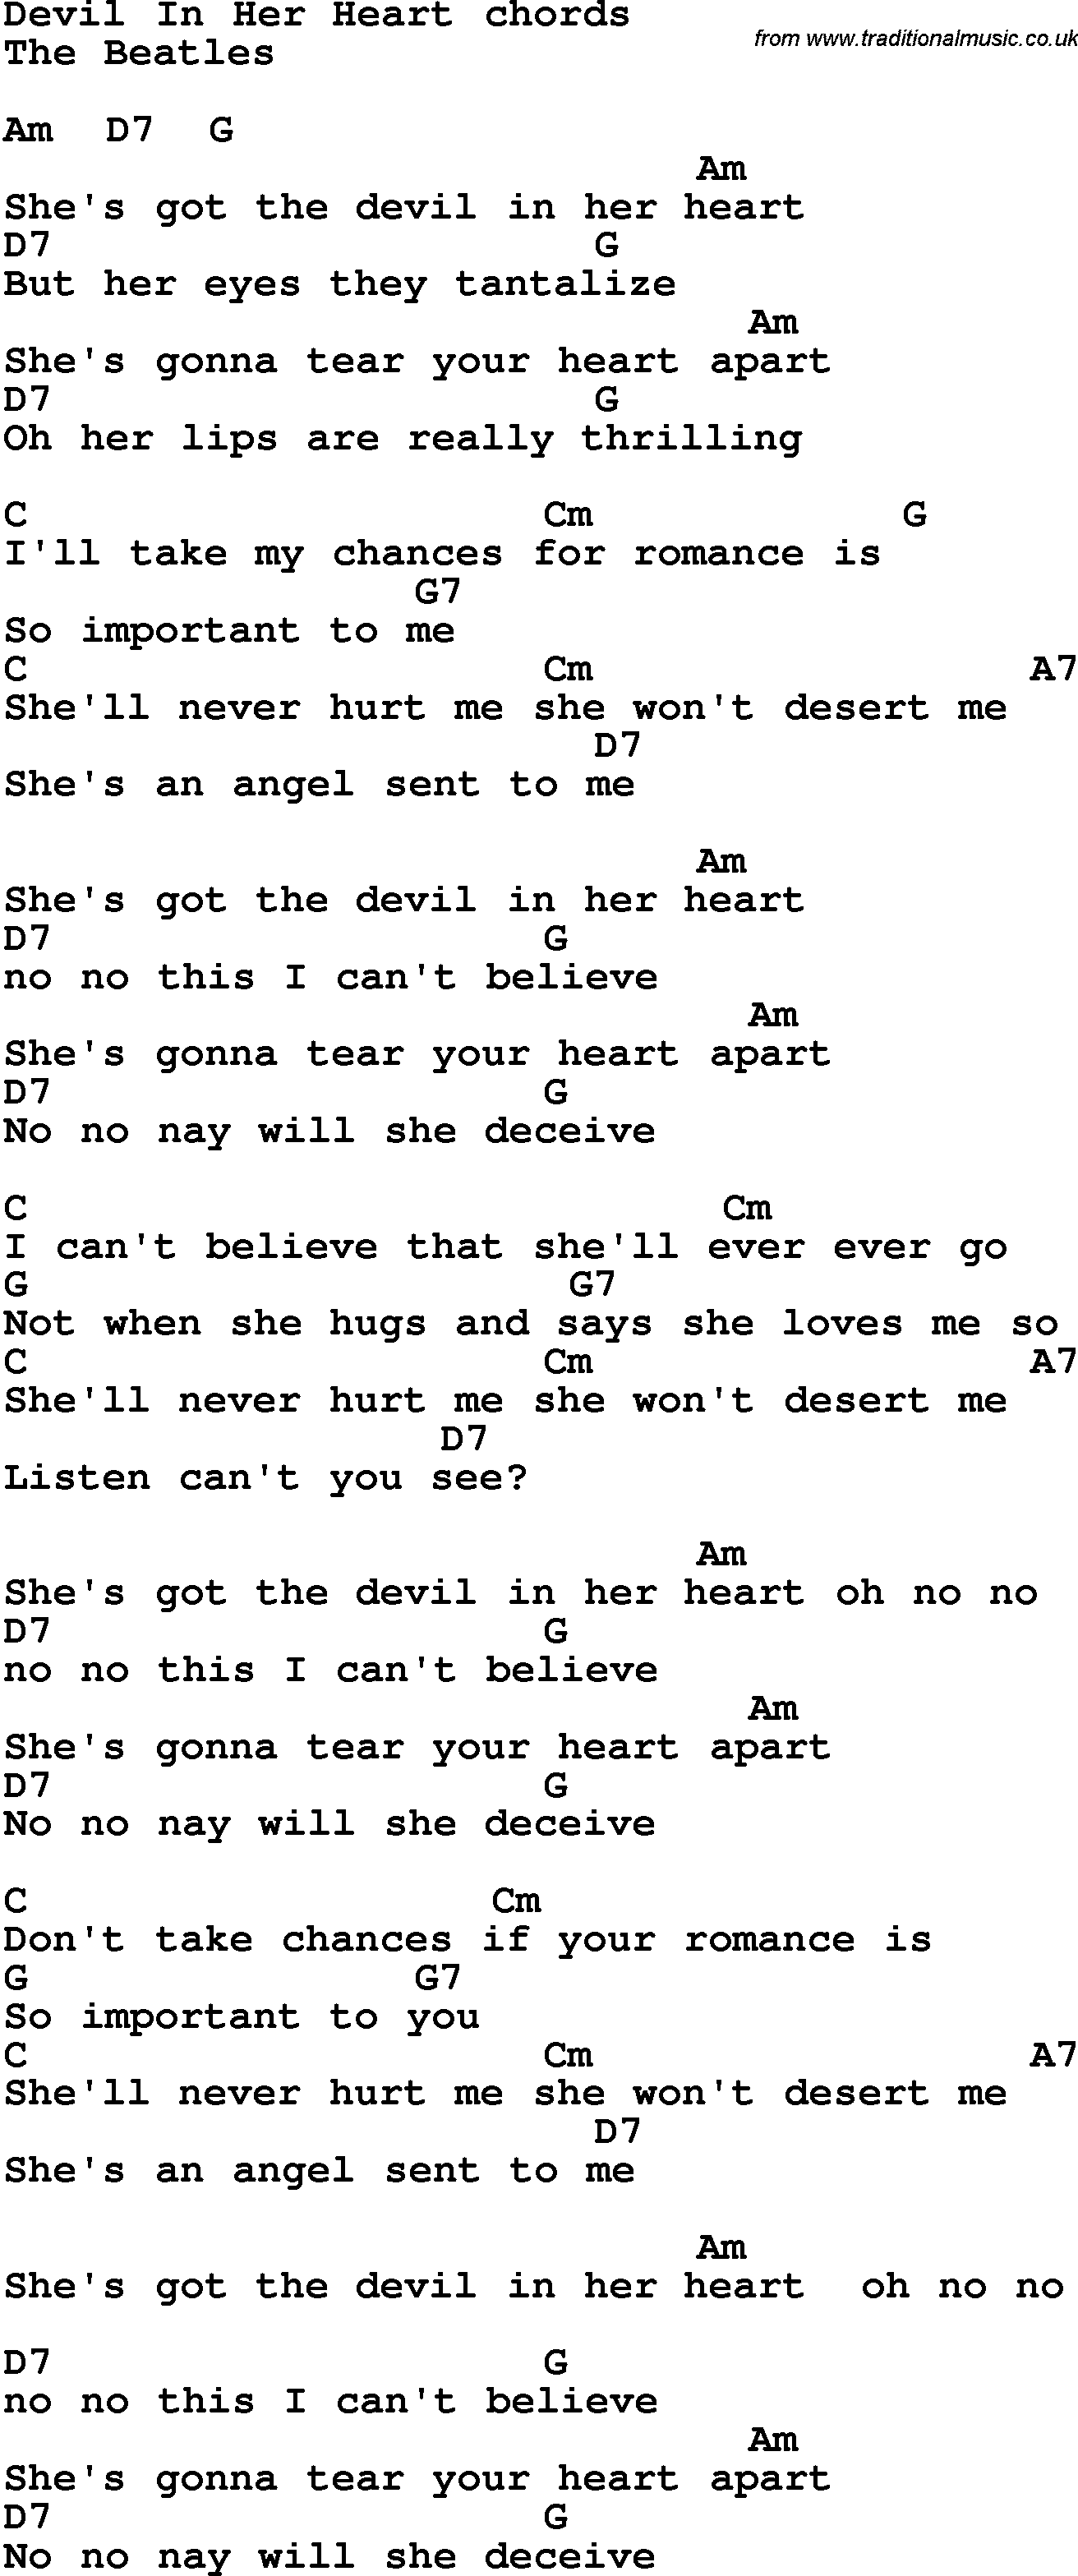 Song Lyrics with guitar chords for Devil In Her Heart - The Beatles